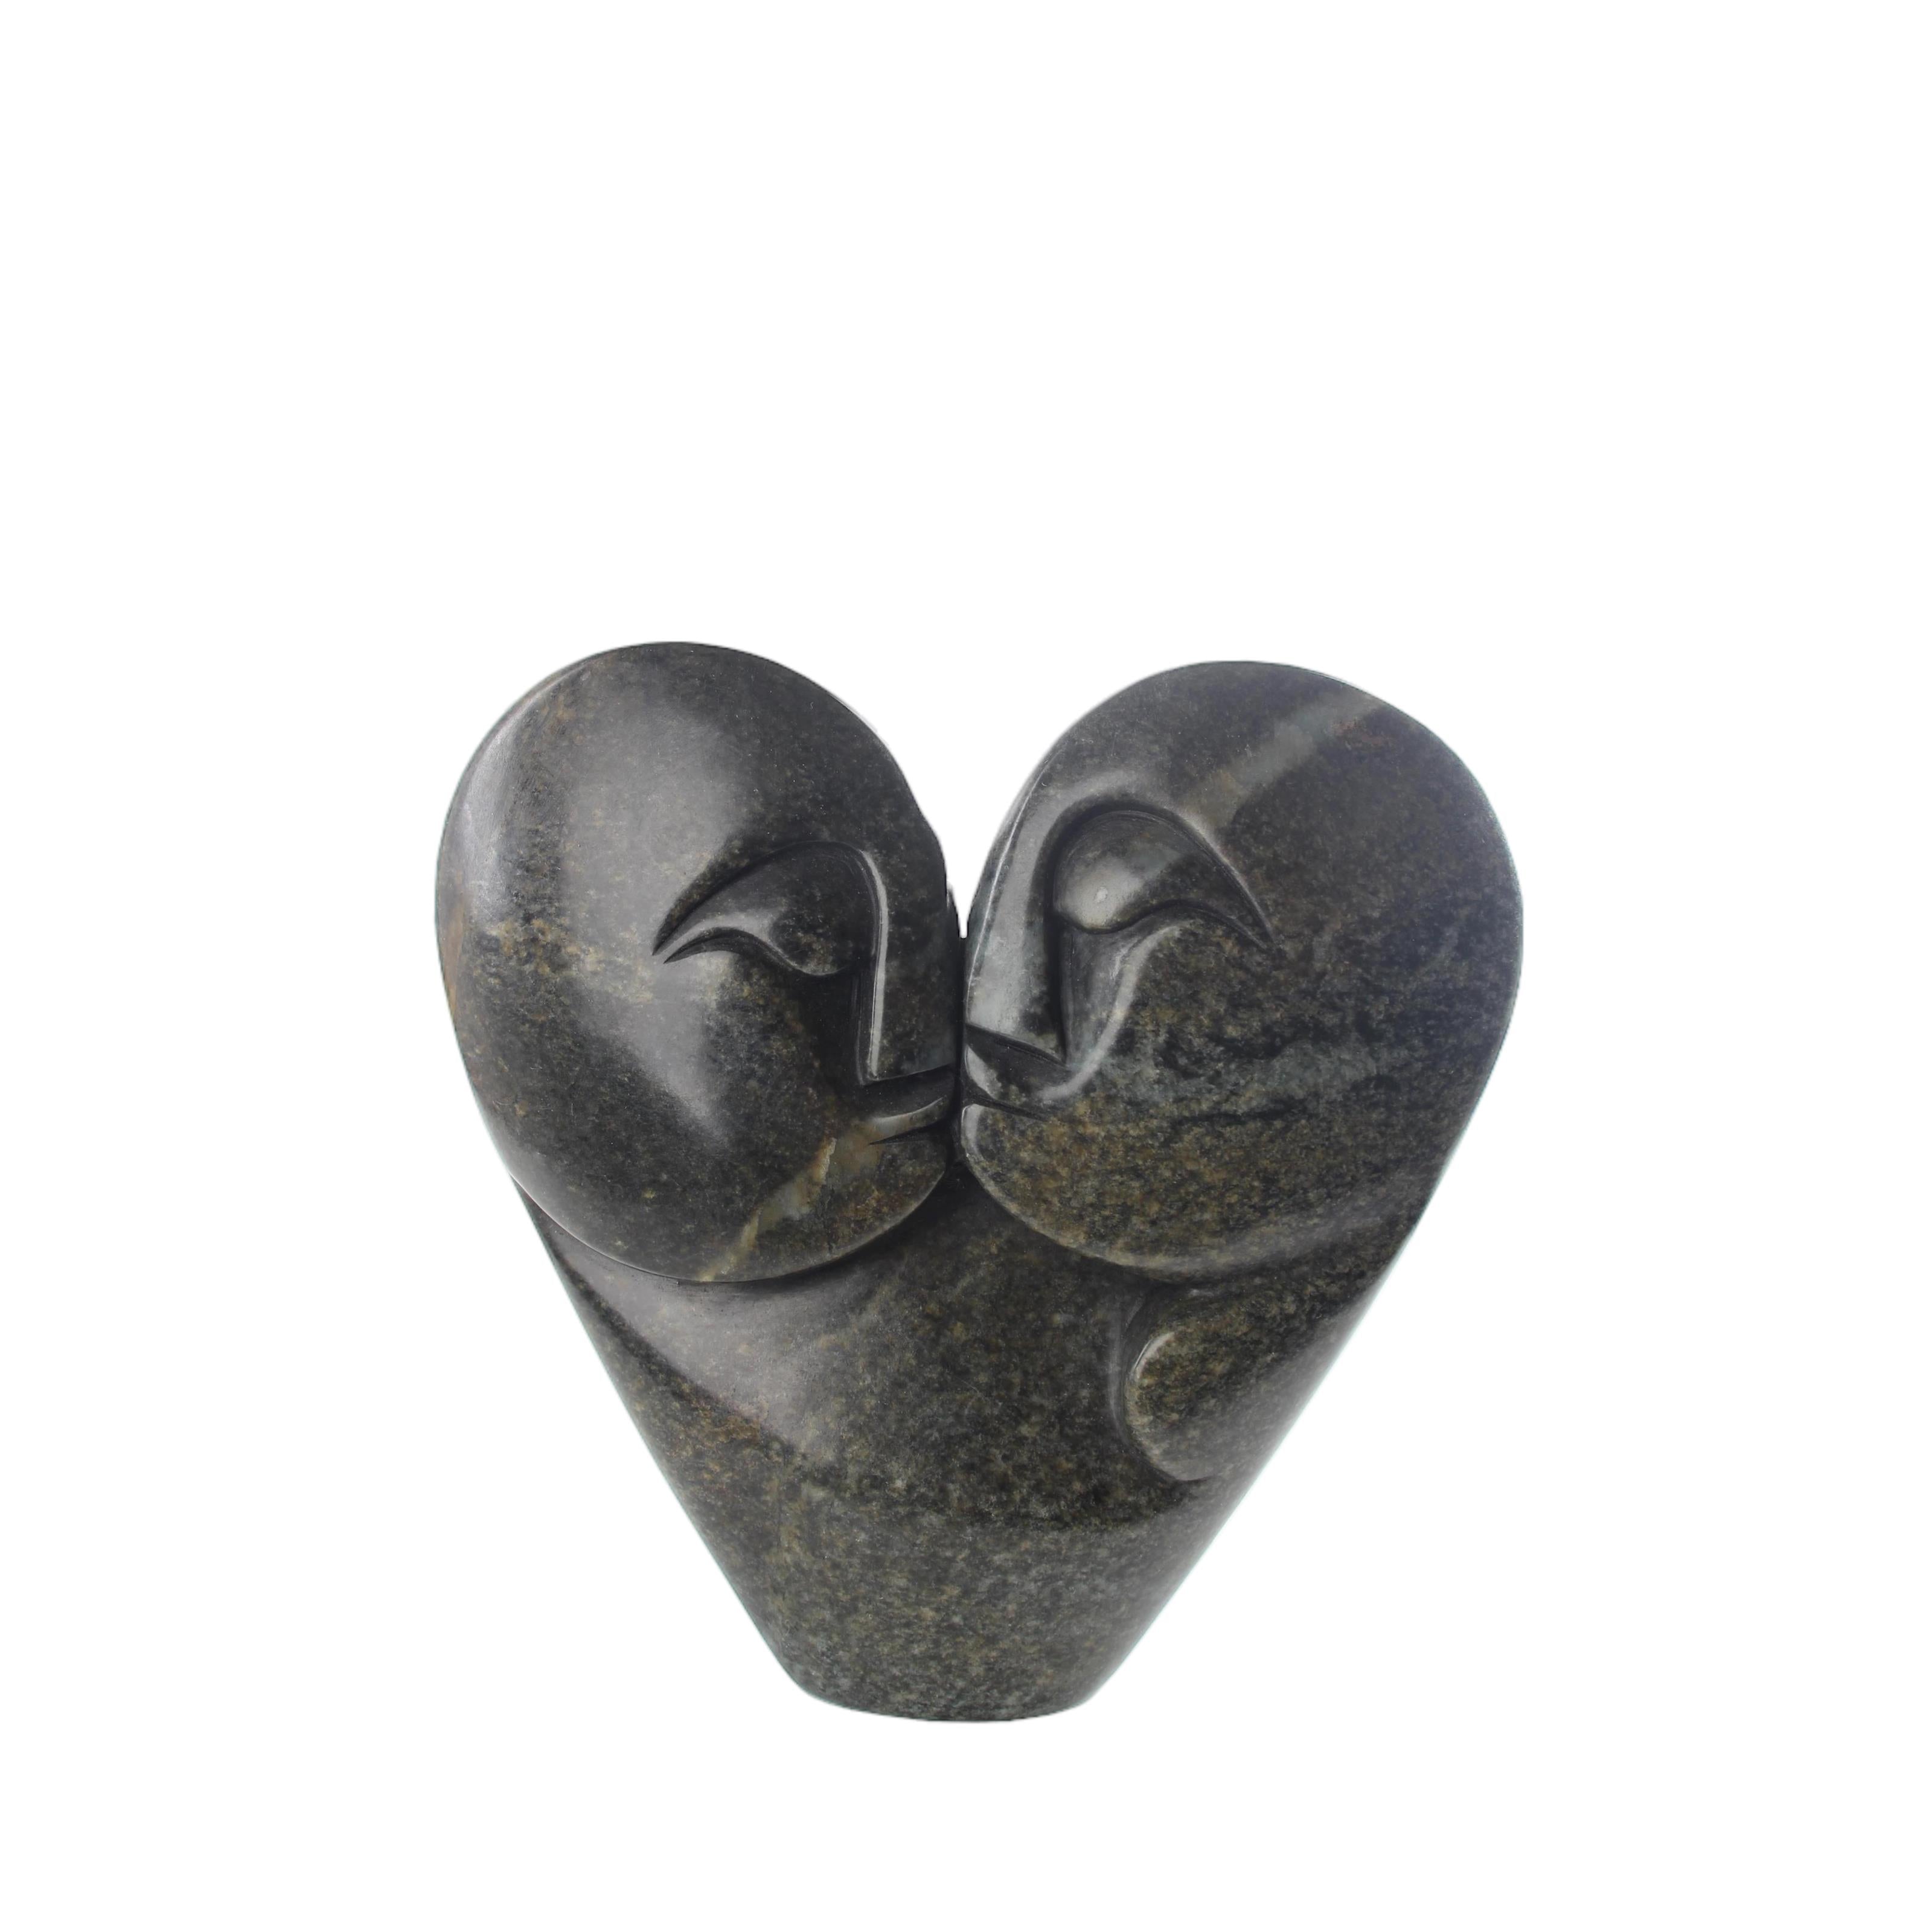 Shona Tribe Serpentine Stone Lovers ~7.1" Tall - Lovers